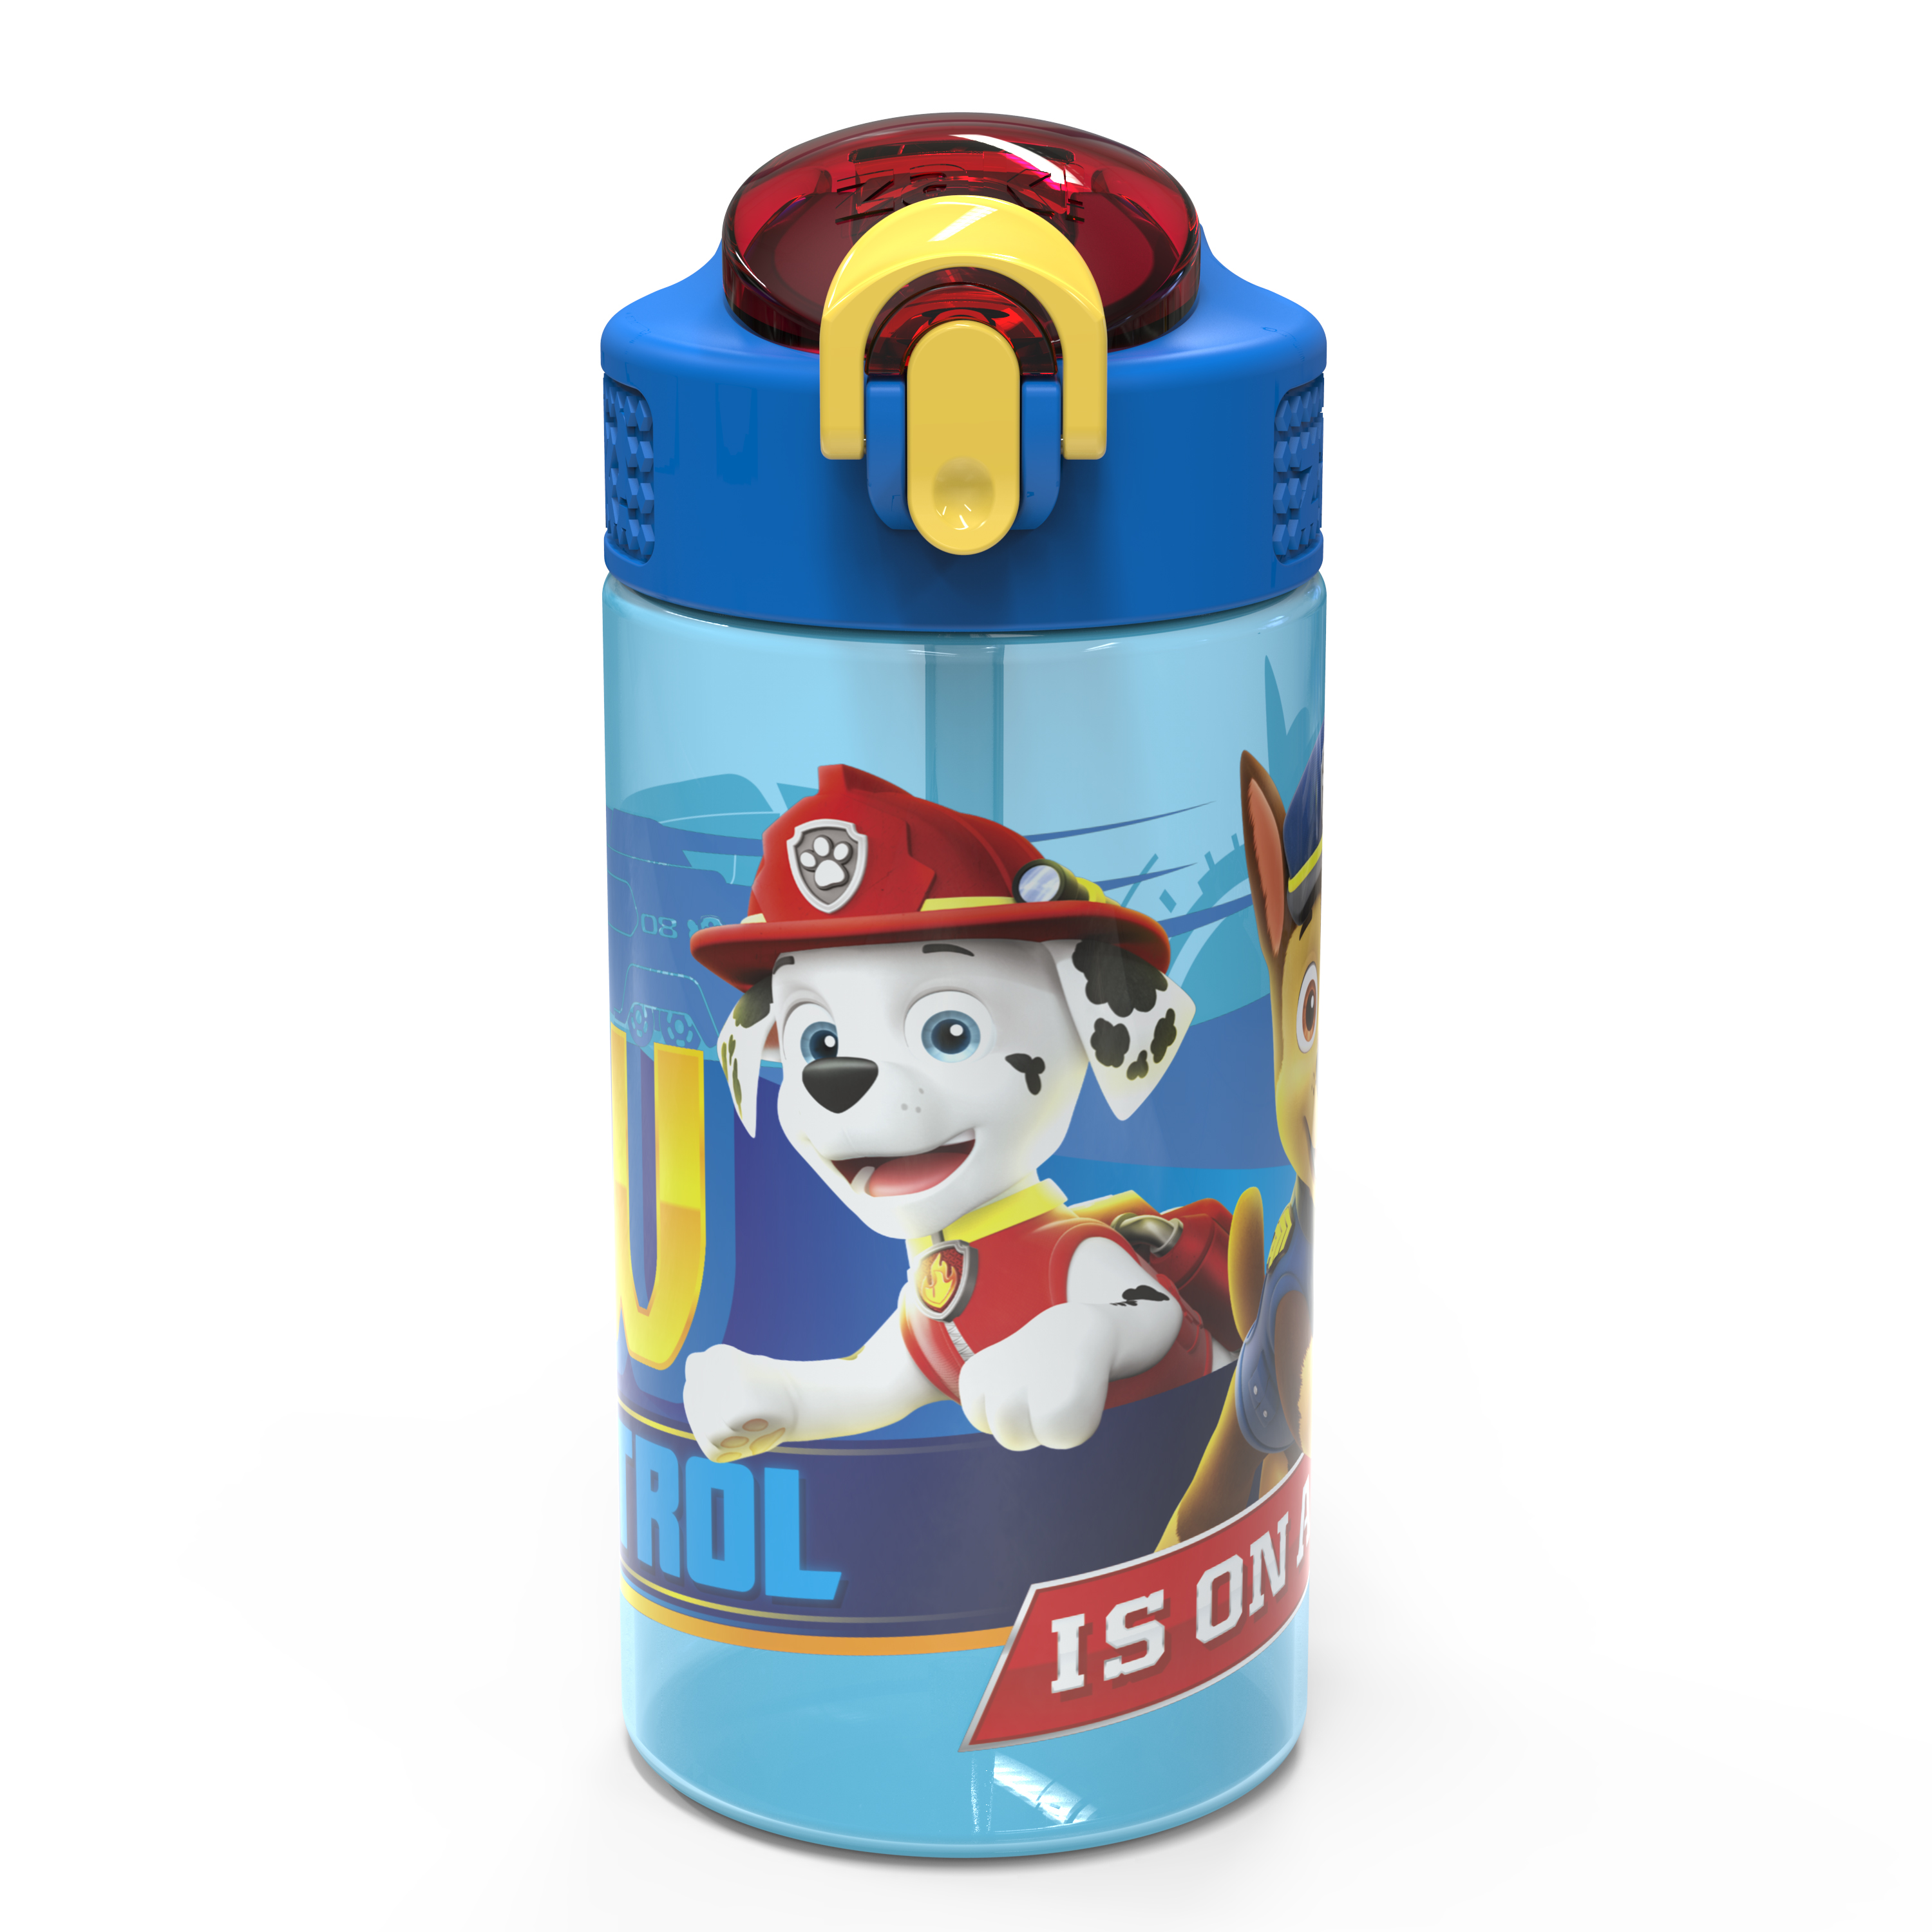 Zak Designs Paw Patrol 16 Ounce Reusable Plastic Water Bottle, Chase and Marshall - image 1 of 8